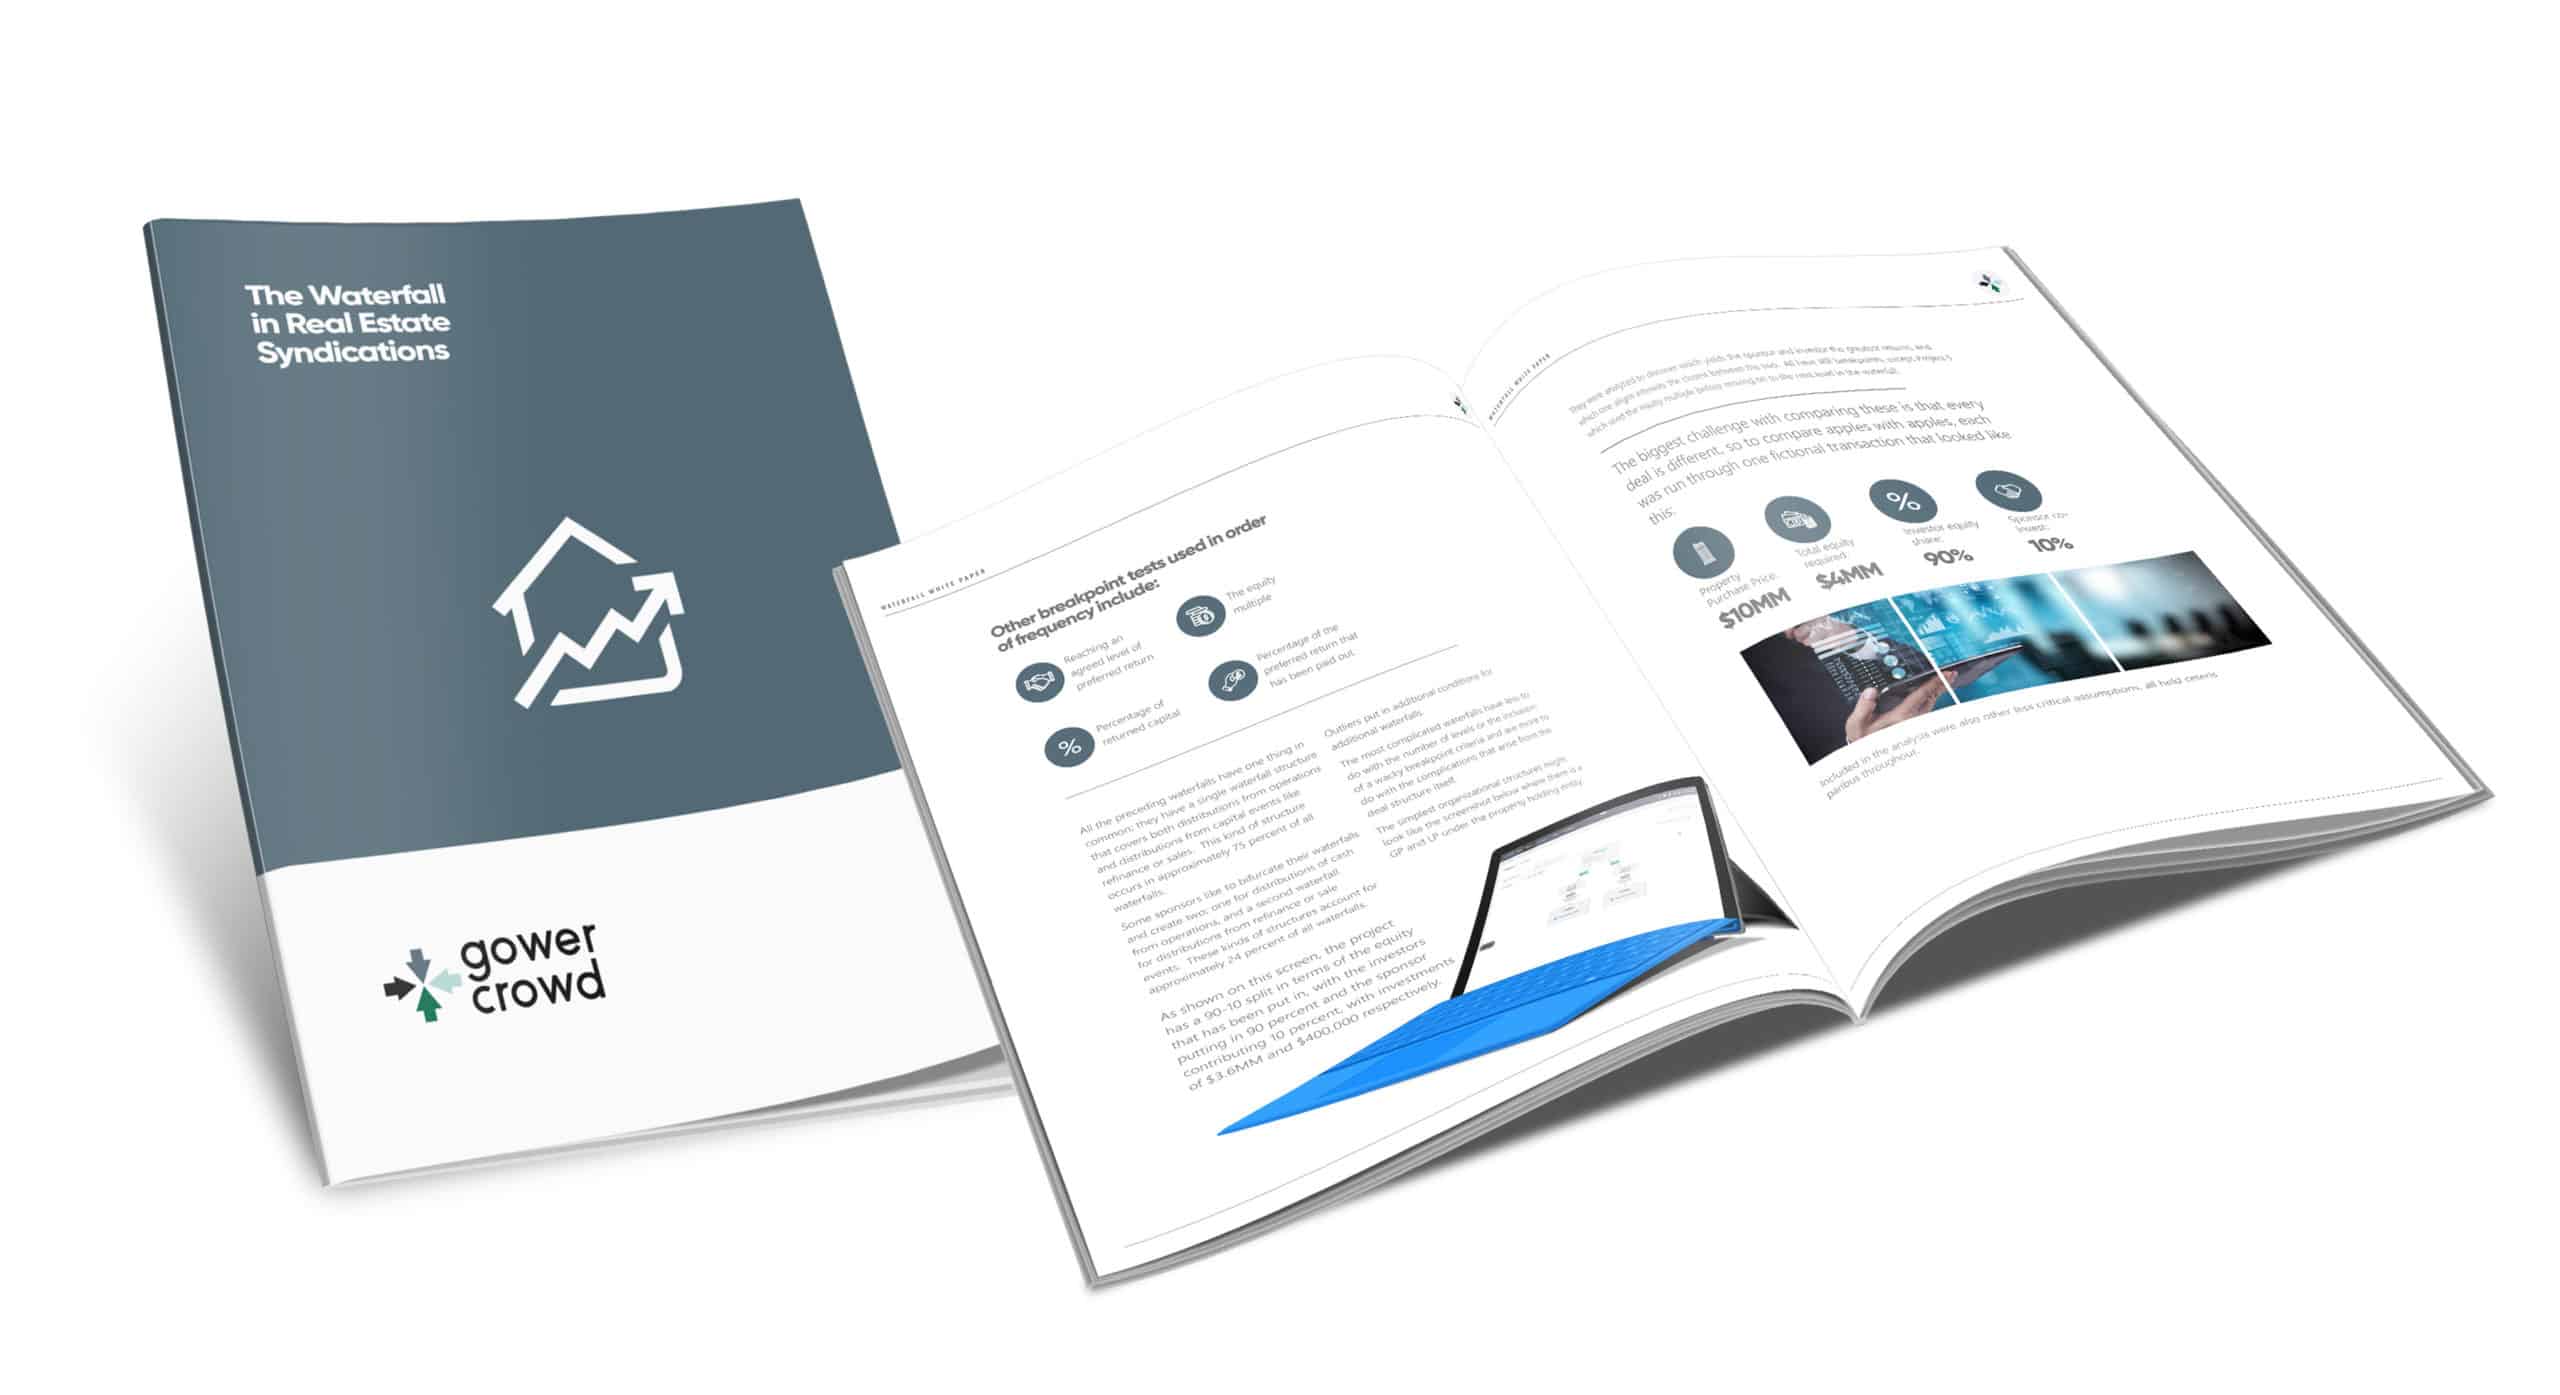 Image of the waterfalls white paper free download.